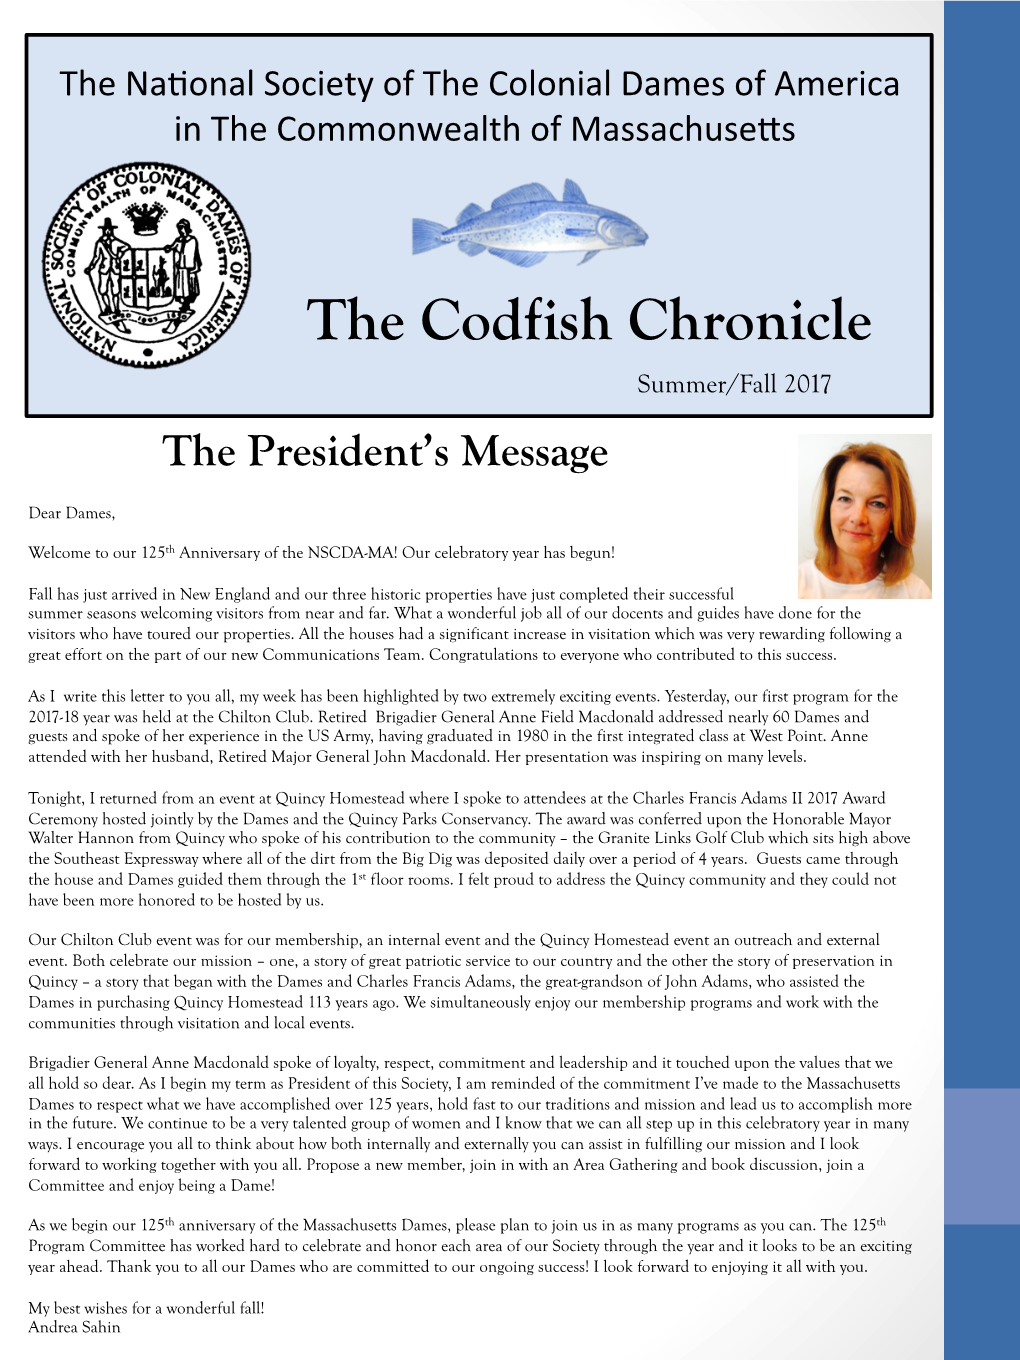 The Codfish Chronicle Summer/Fall 2017 the President’S Message